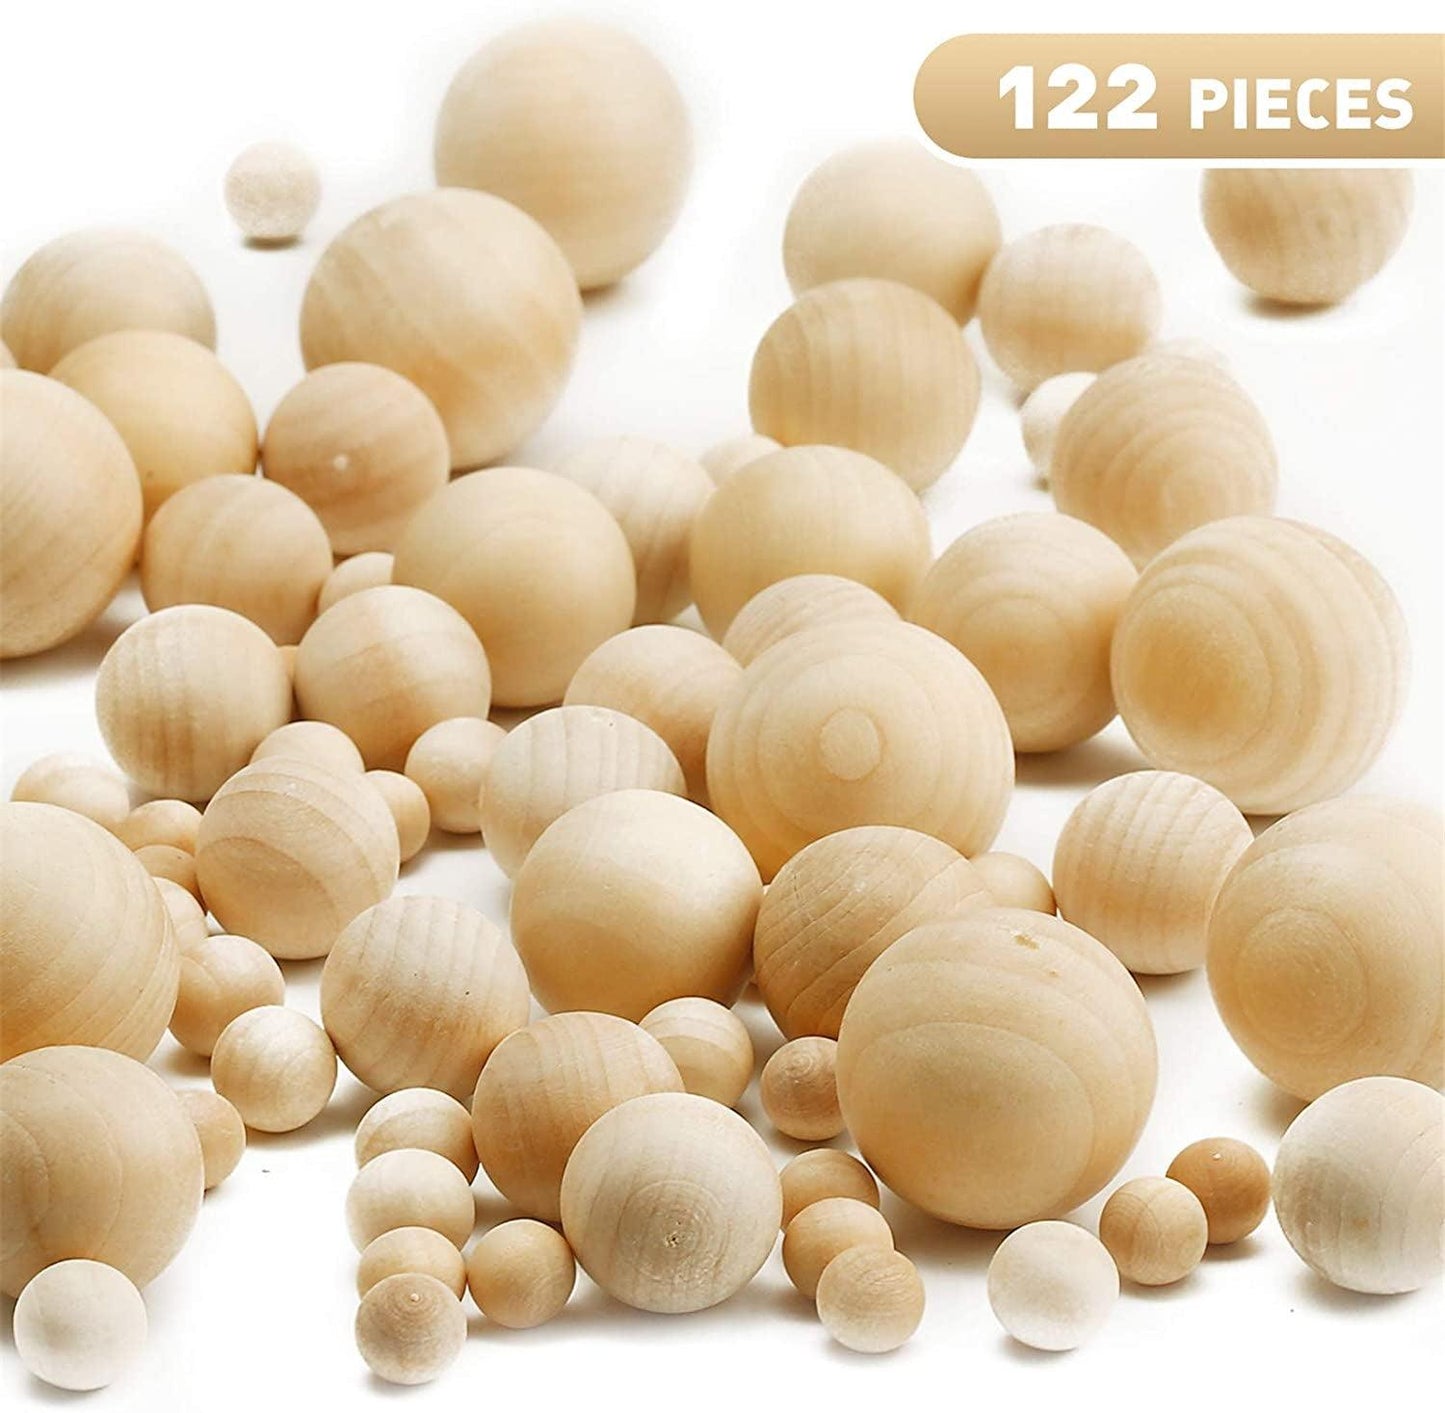 122 Pieces round Wood Balls Unfinished Wooden Balls Natural Craft Balls for DIY Projects Jewelry Making Arts Design, 5 Sizes - WoodArtSupply